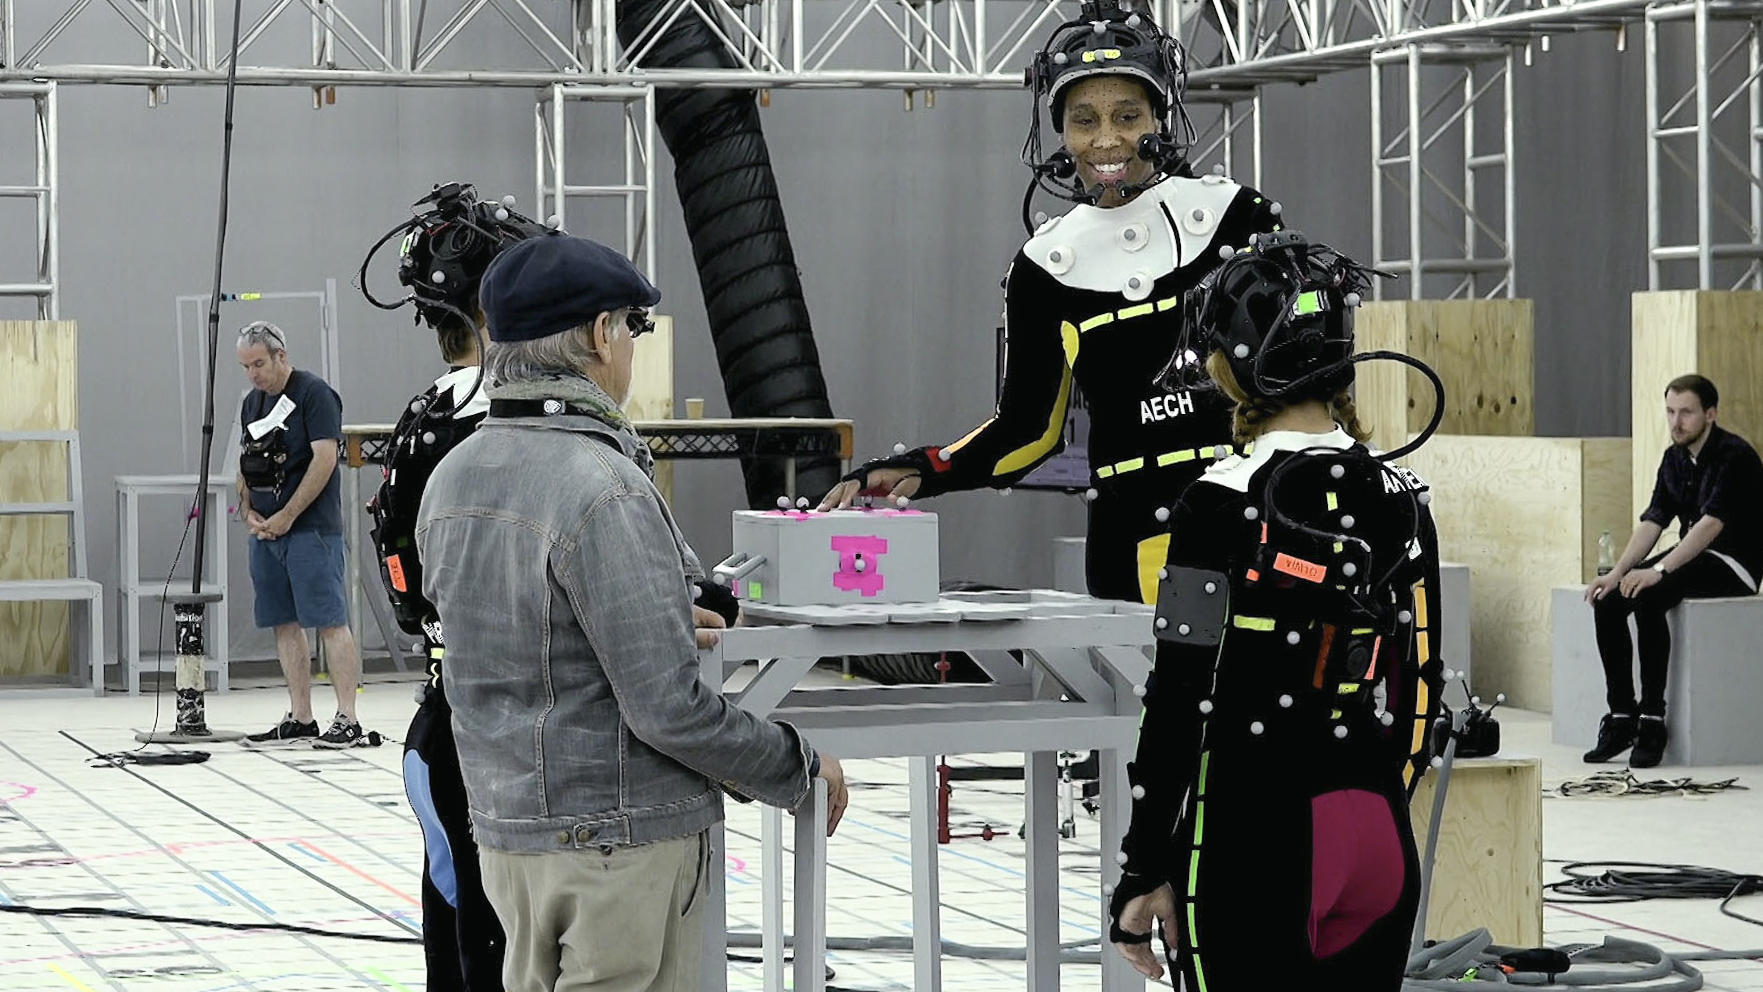 How 'Ready Player One' Combined Virtual Production And Motion Capture Tools  To Create Digital Characters